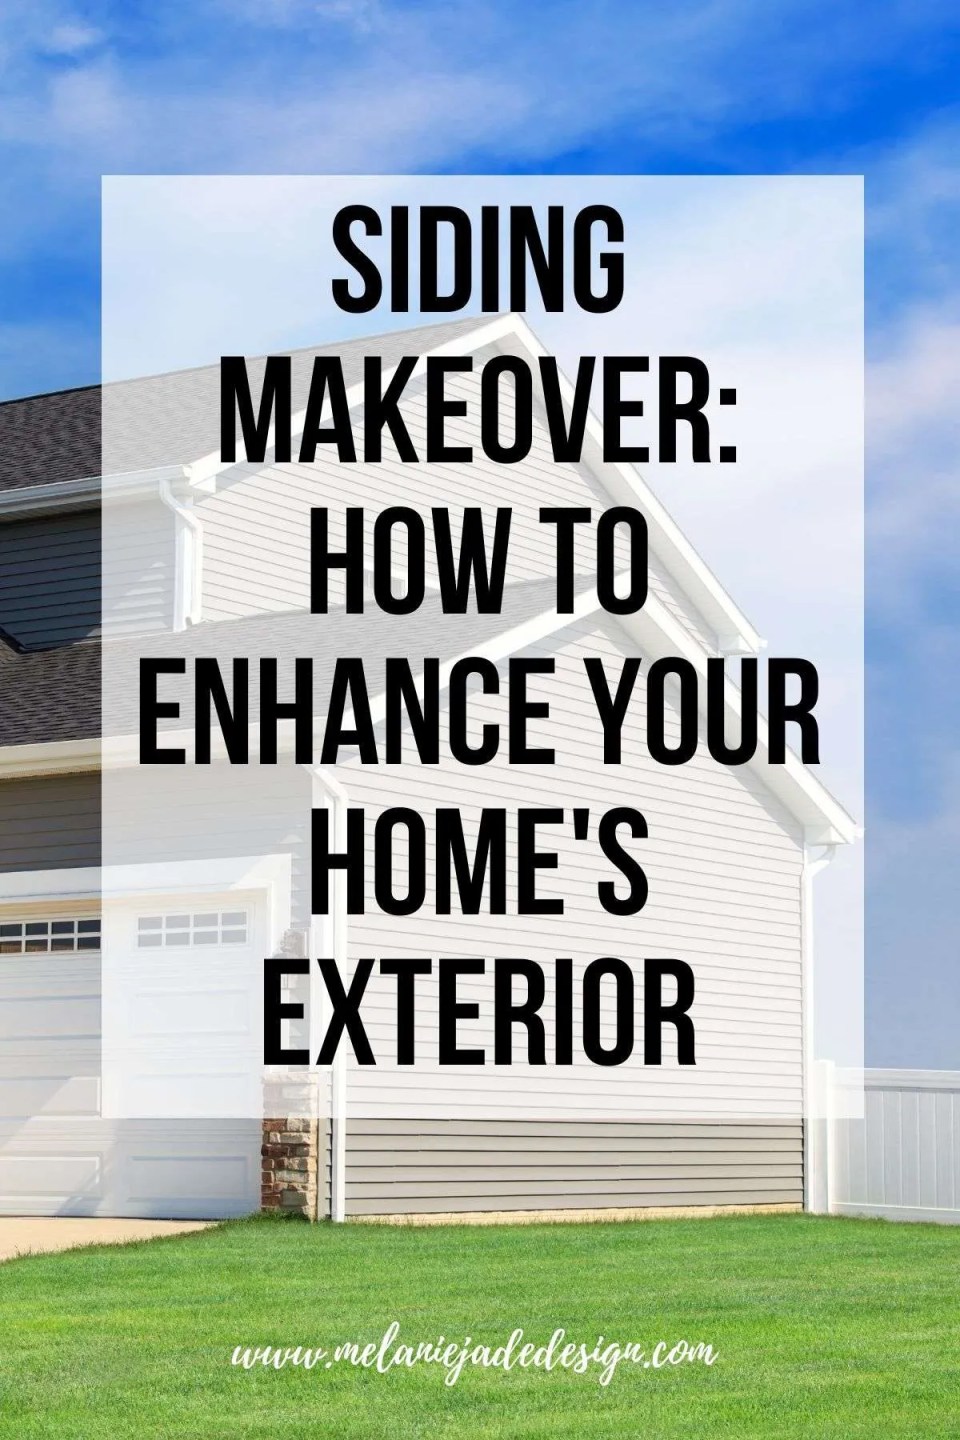 Siding Makeover: How to Enhance Your Home's Exterior Pinterest pin